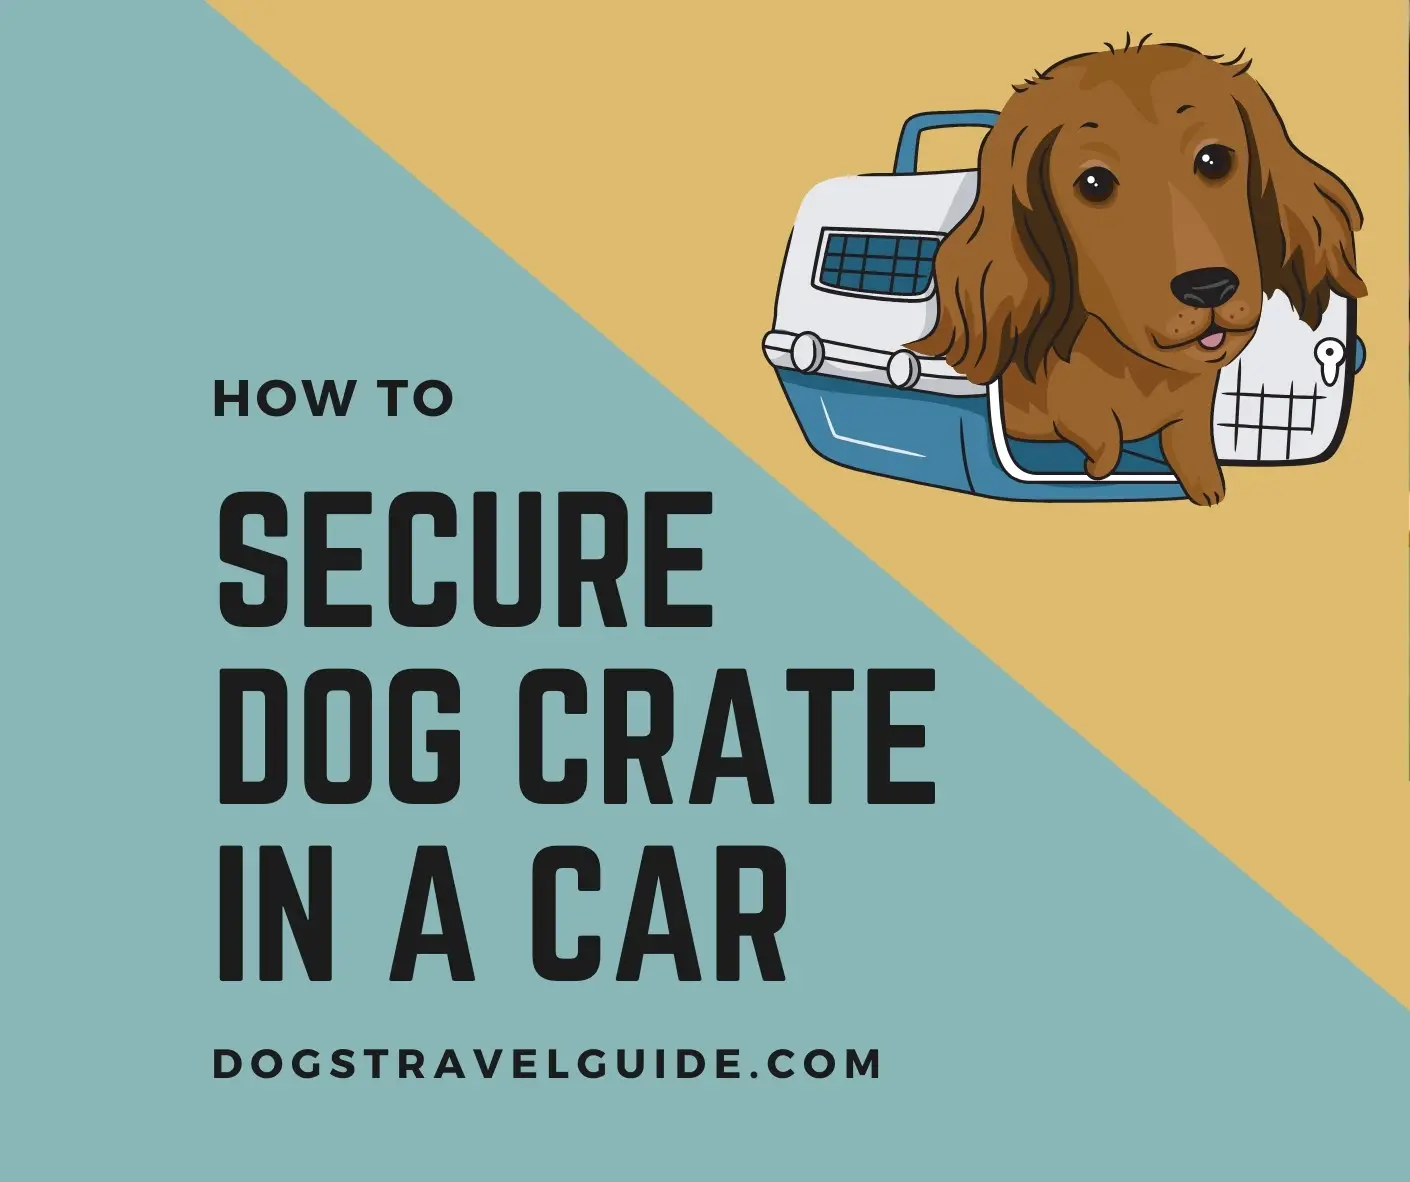 How To Secure Dog Crate In Car? - Dogs Travel Guide